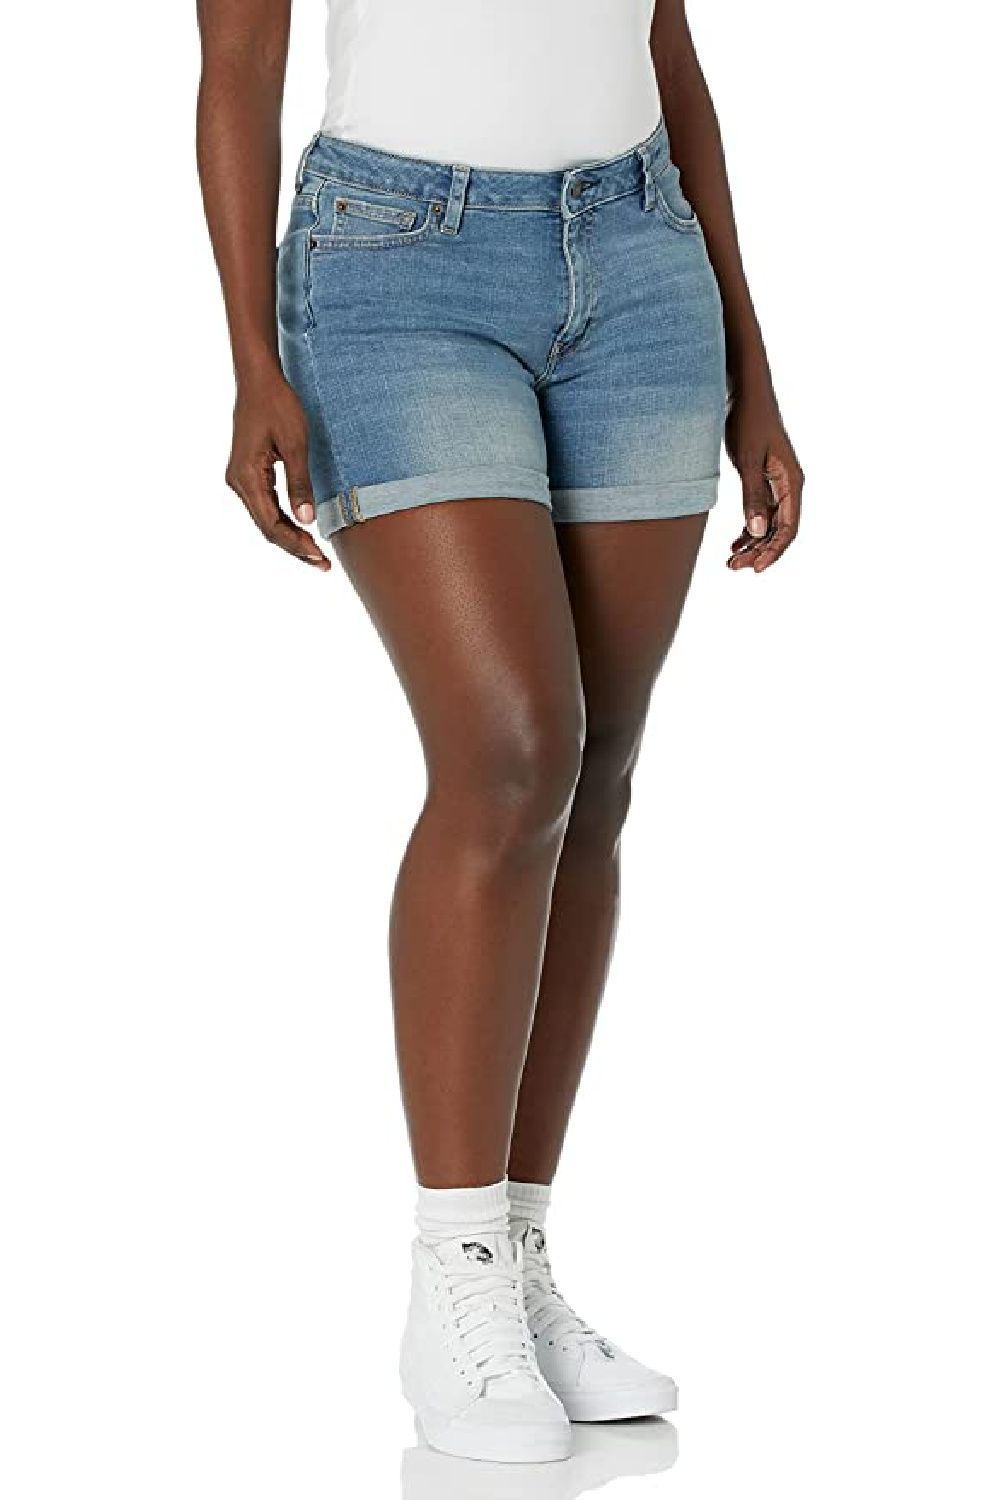 Sidefeel Women Mid Rise Distressed Cuffed Rolled Hem Casual Denim Jeans Shorts 